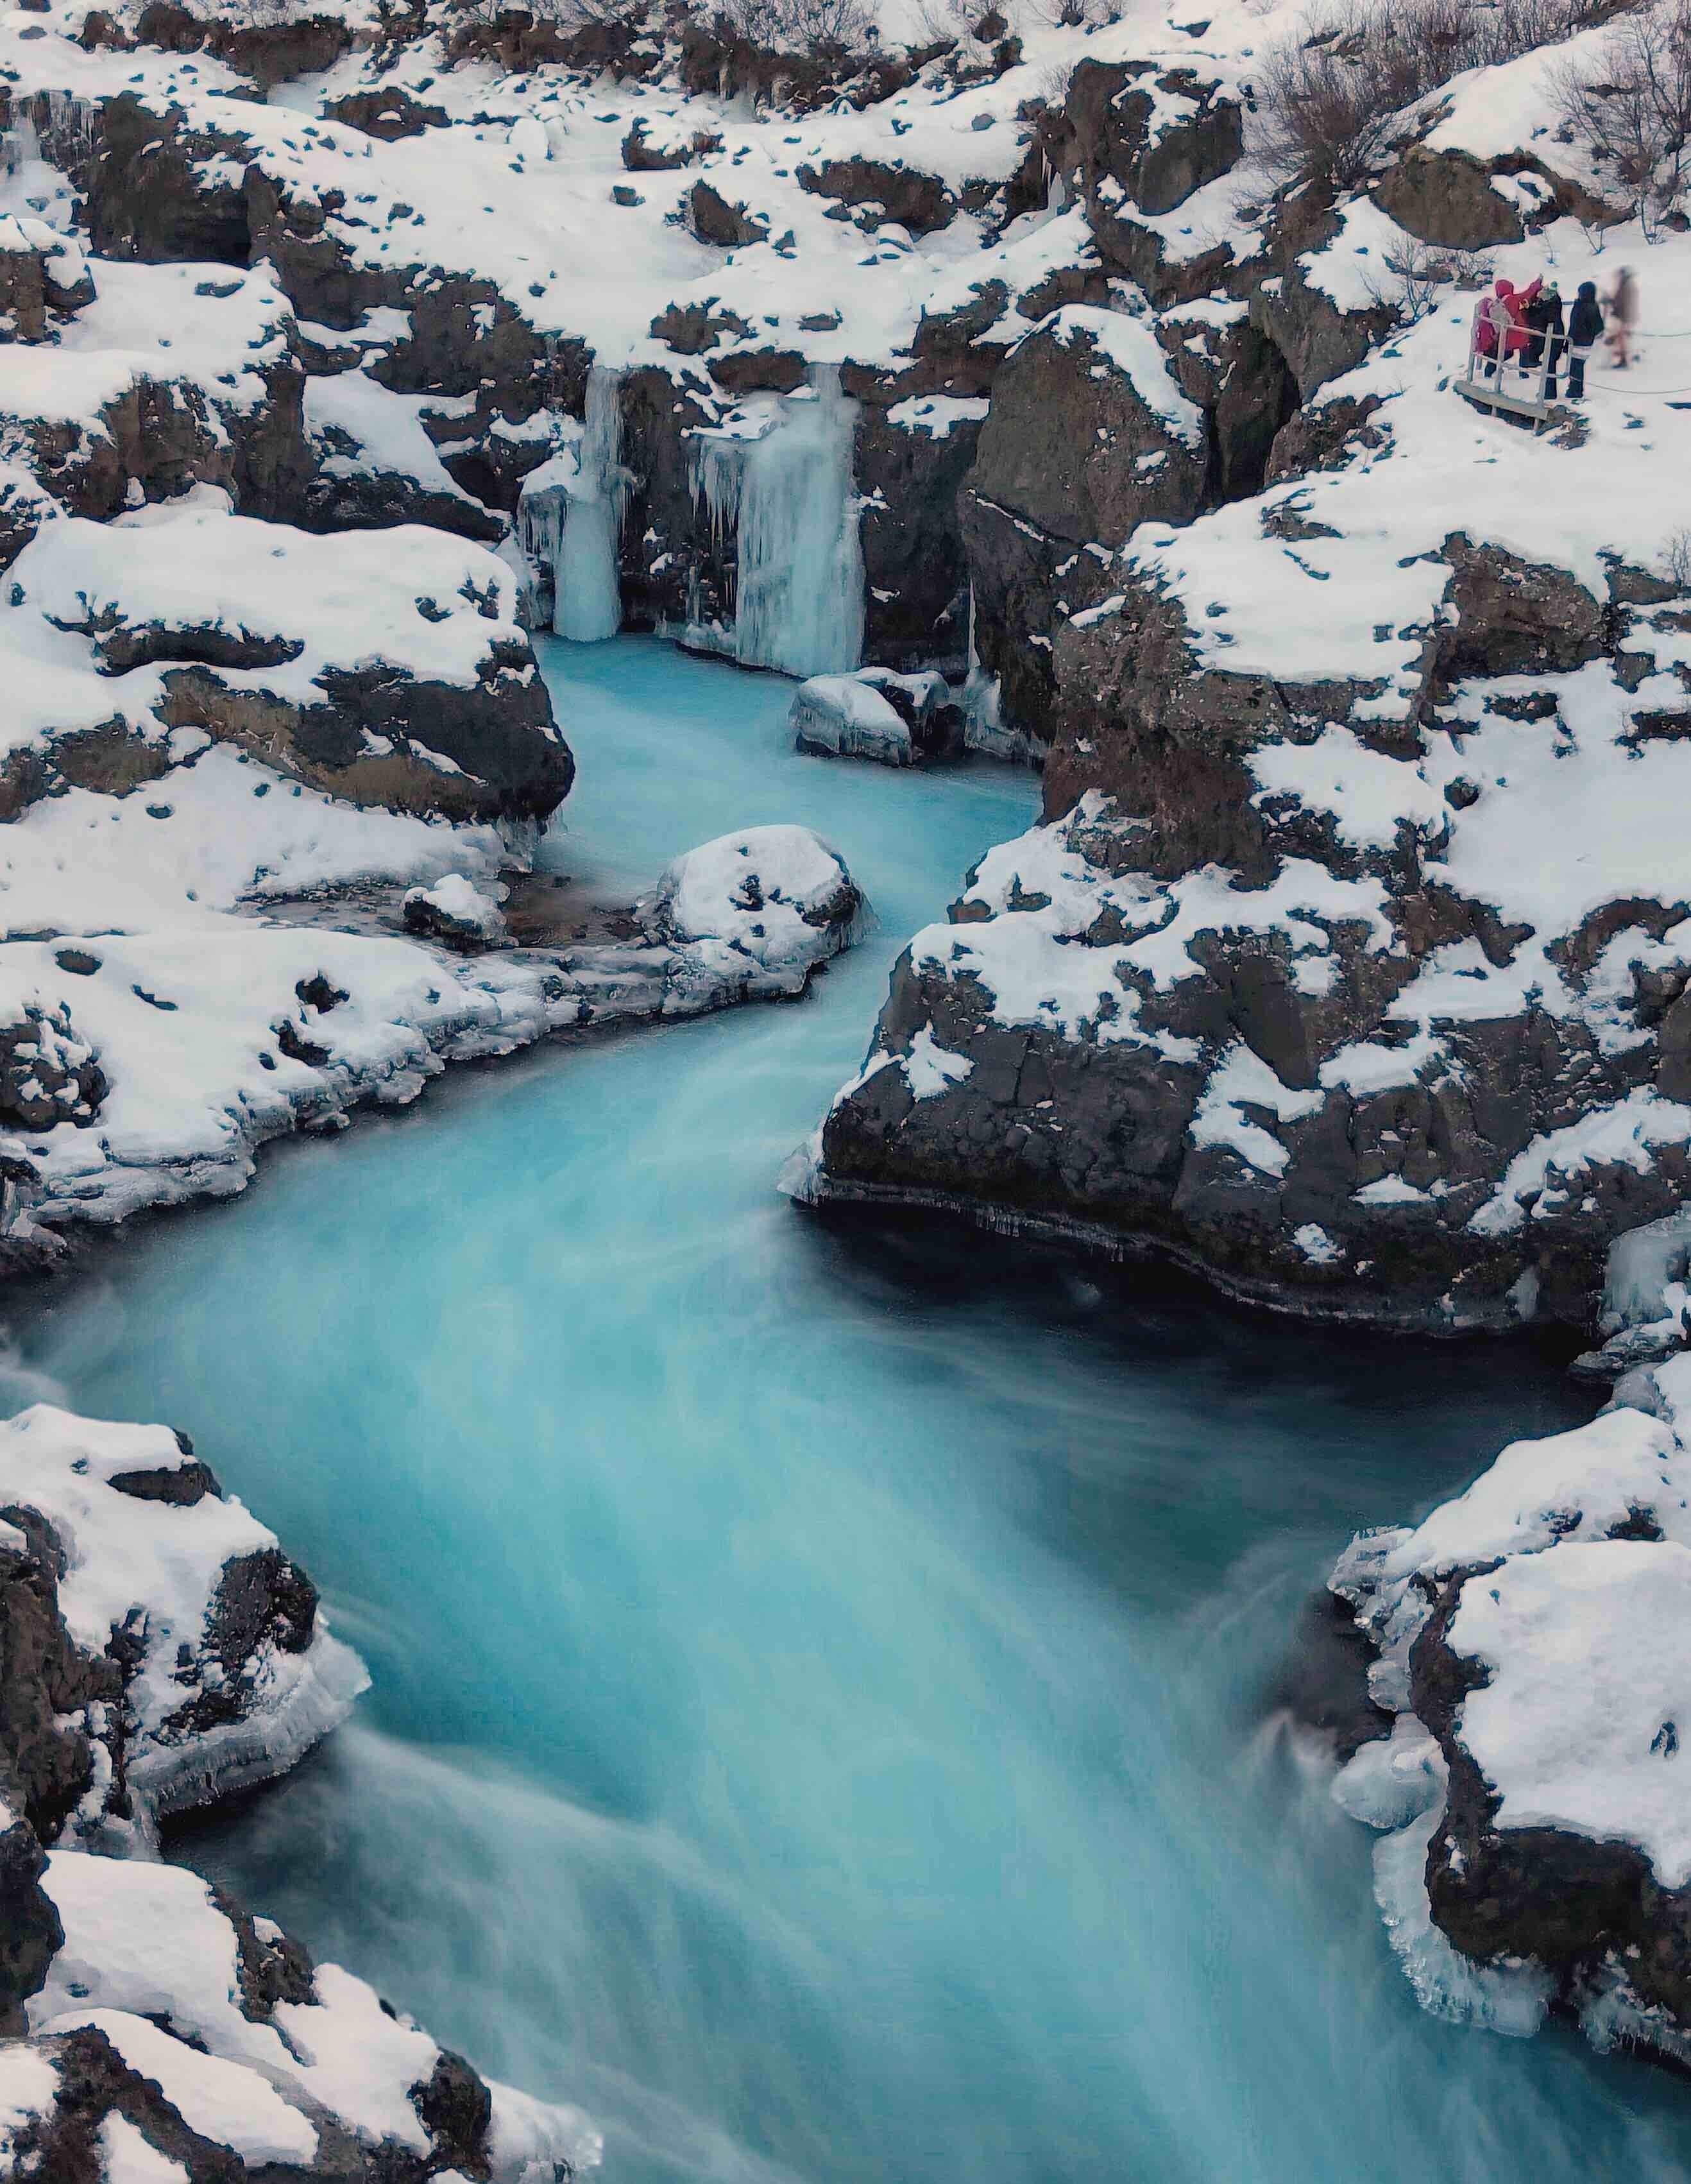 Barnafoss - not the most well known of waterfalls in Iceland but what a stunner in Winter